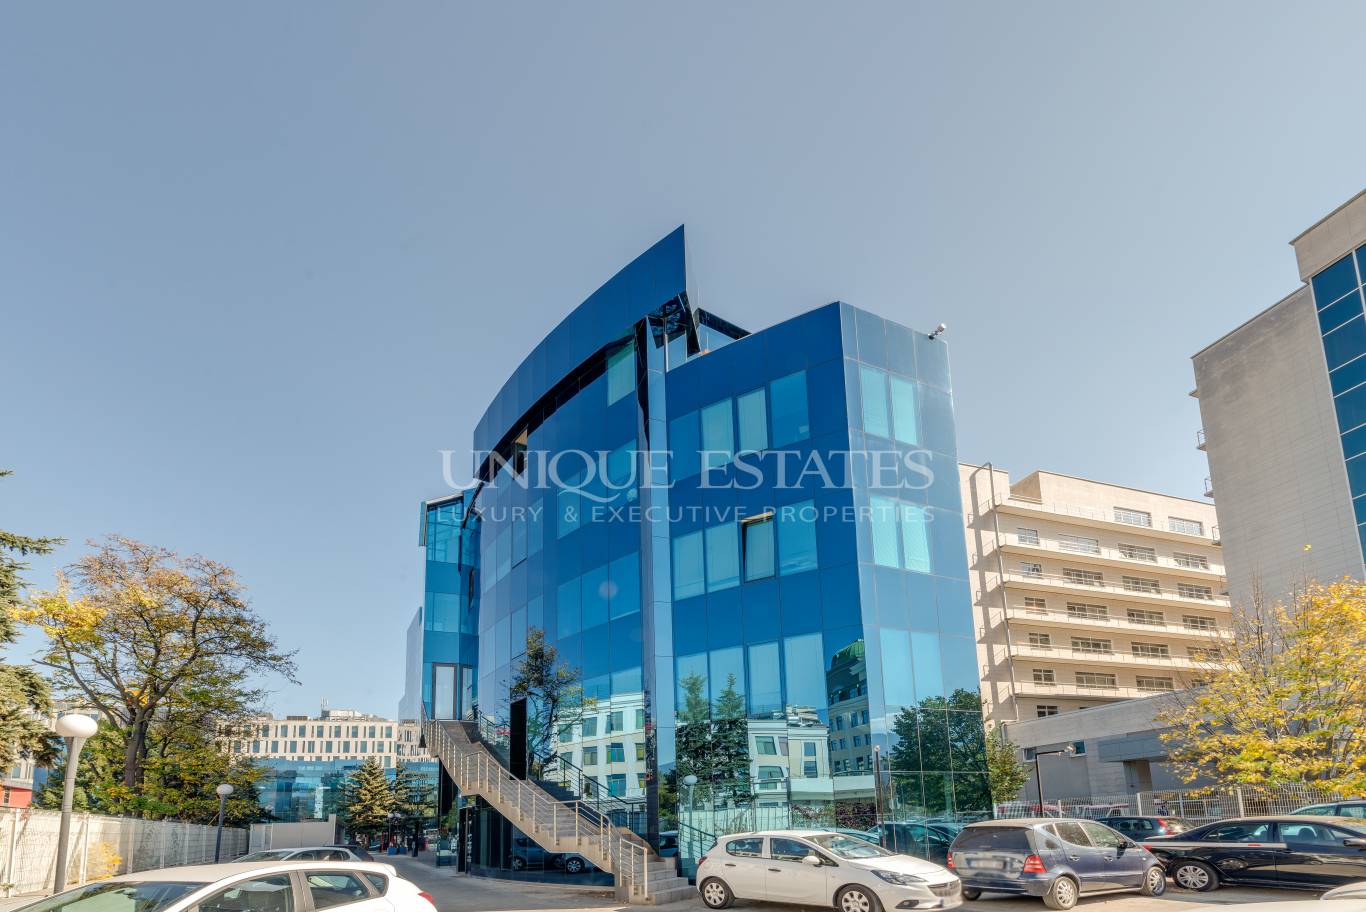 Office Building / Building for sale in Sofia, Downtown with listing ID: K10366 - image 1